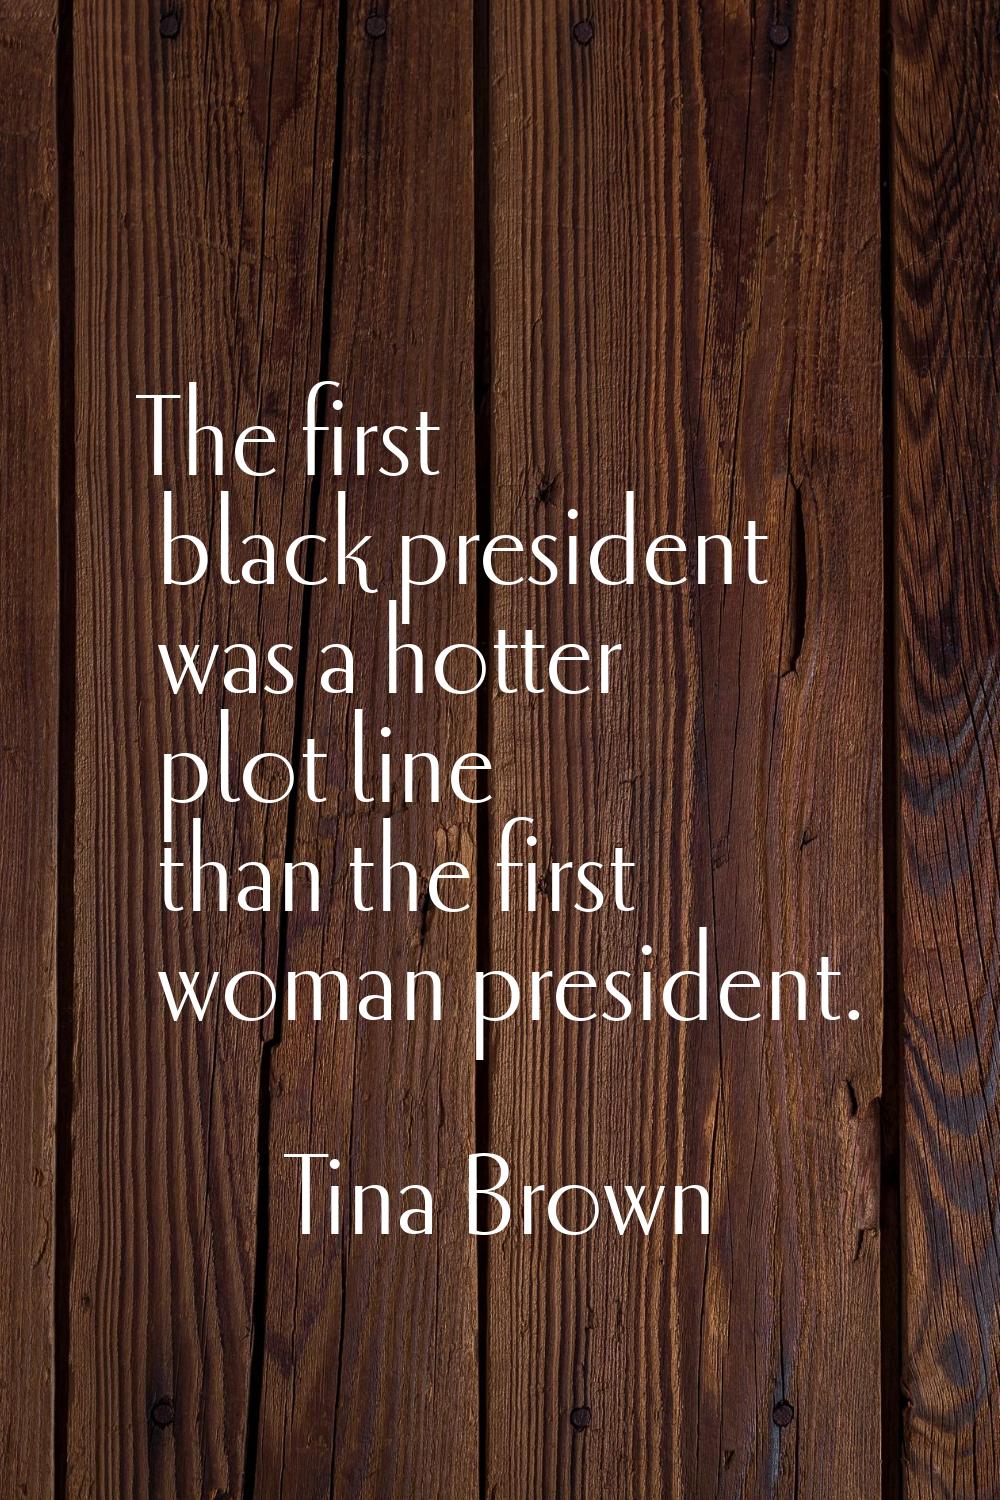 The first black president was a hotter plot line than the first woman president.